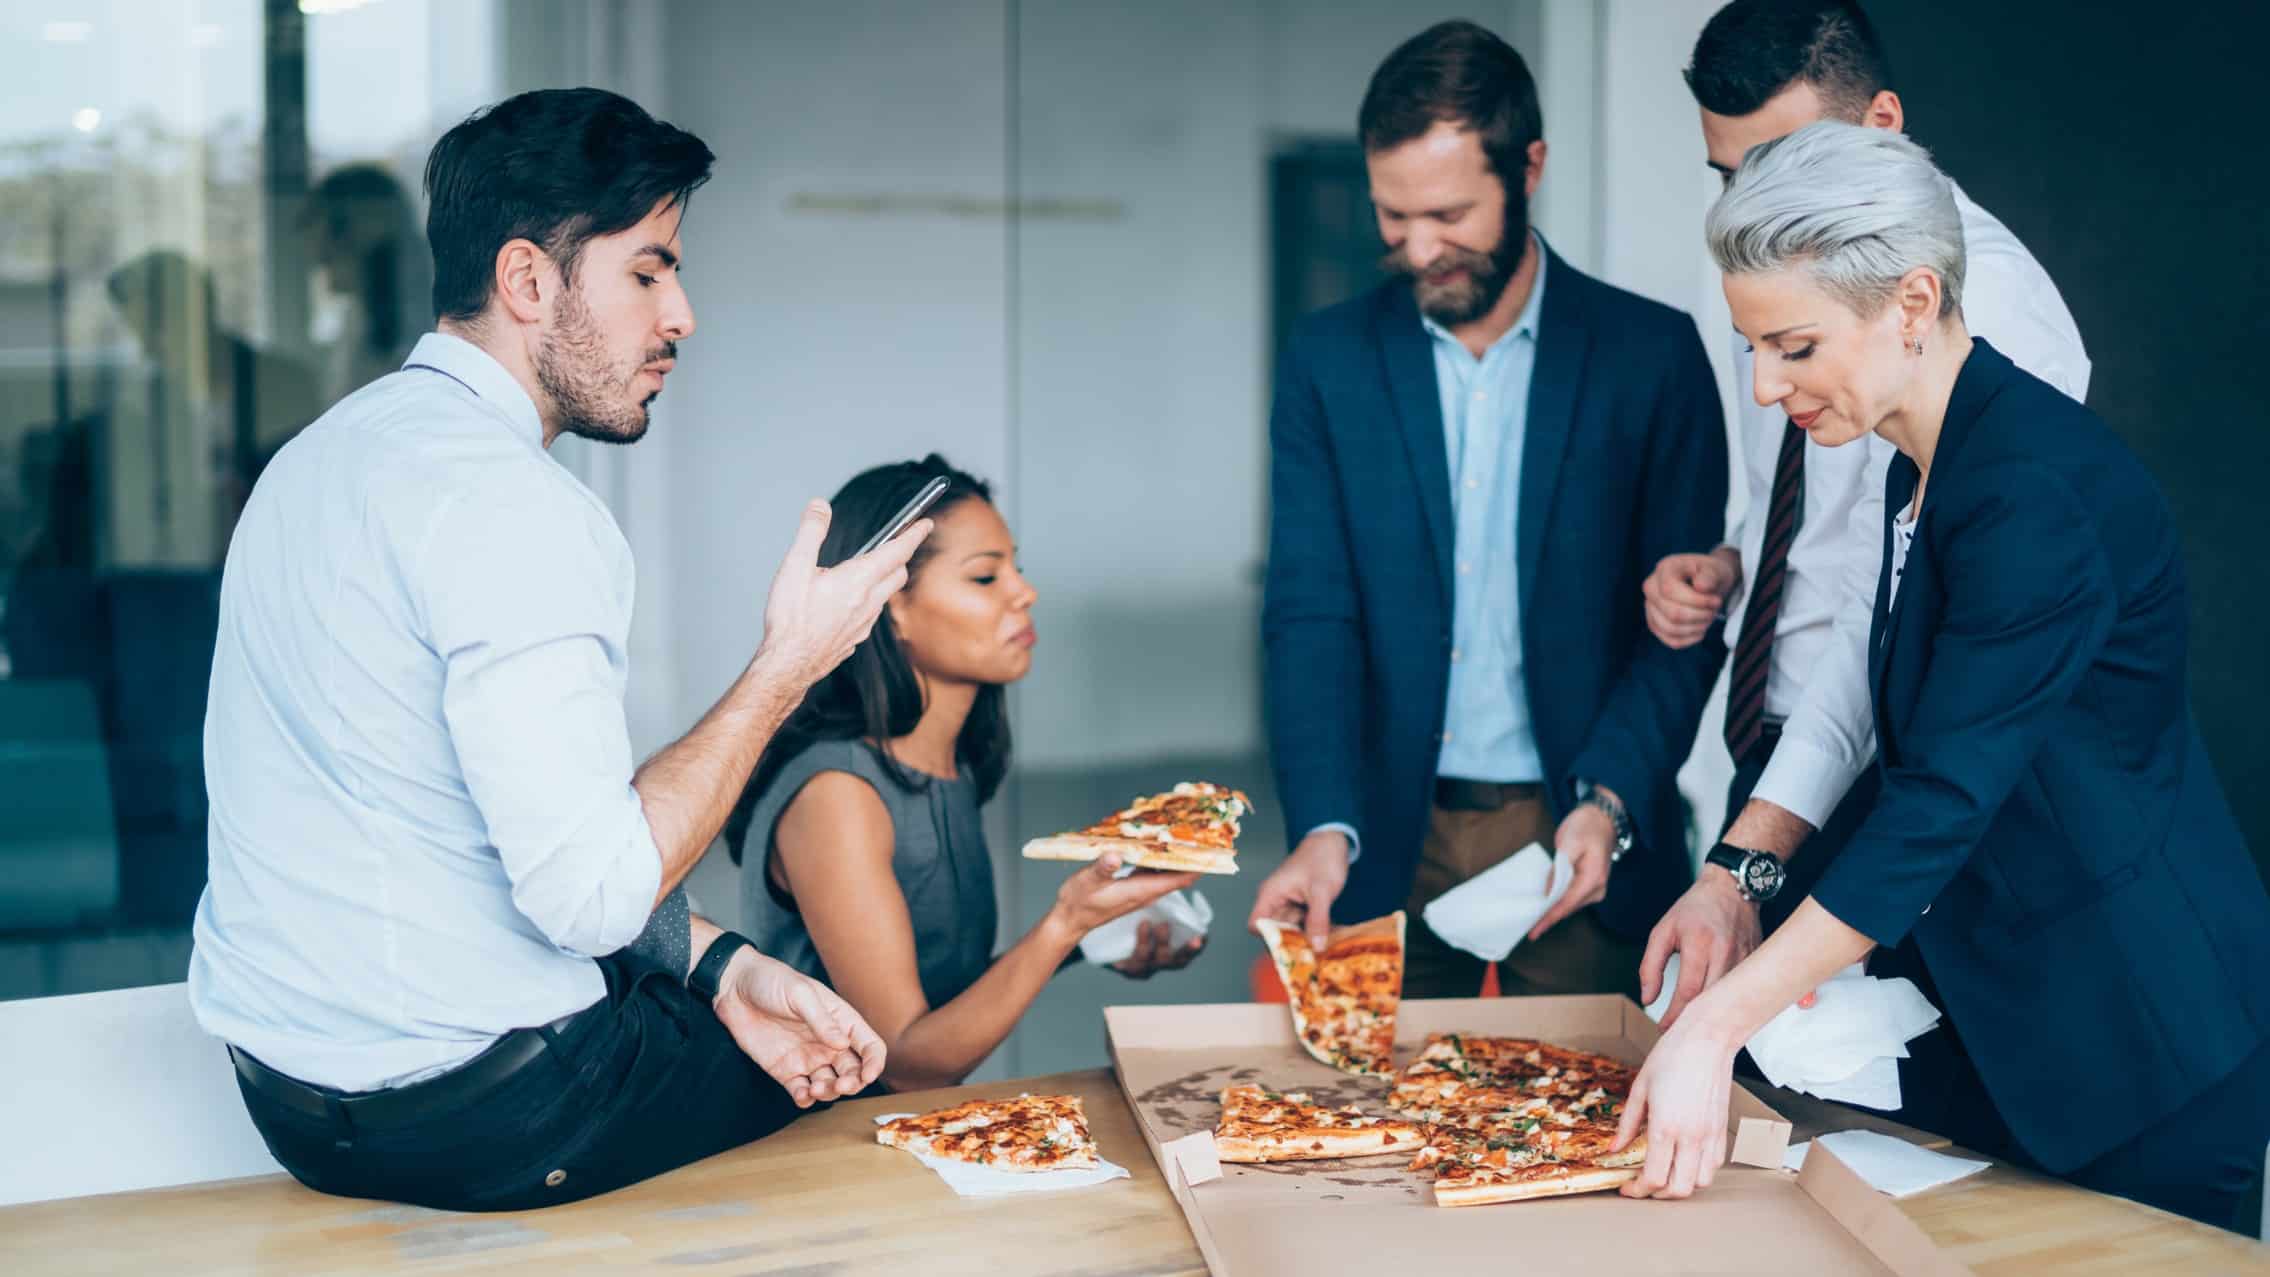 A team in a corporate office shares a pizza while standing around a table chatting about the Domino's share price and Pizza Hut's threat to the business